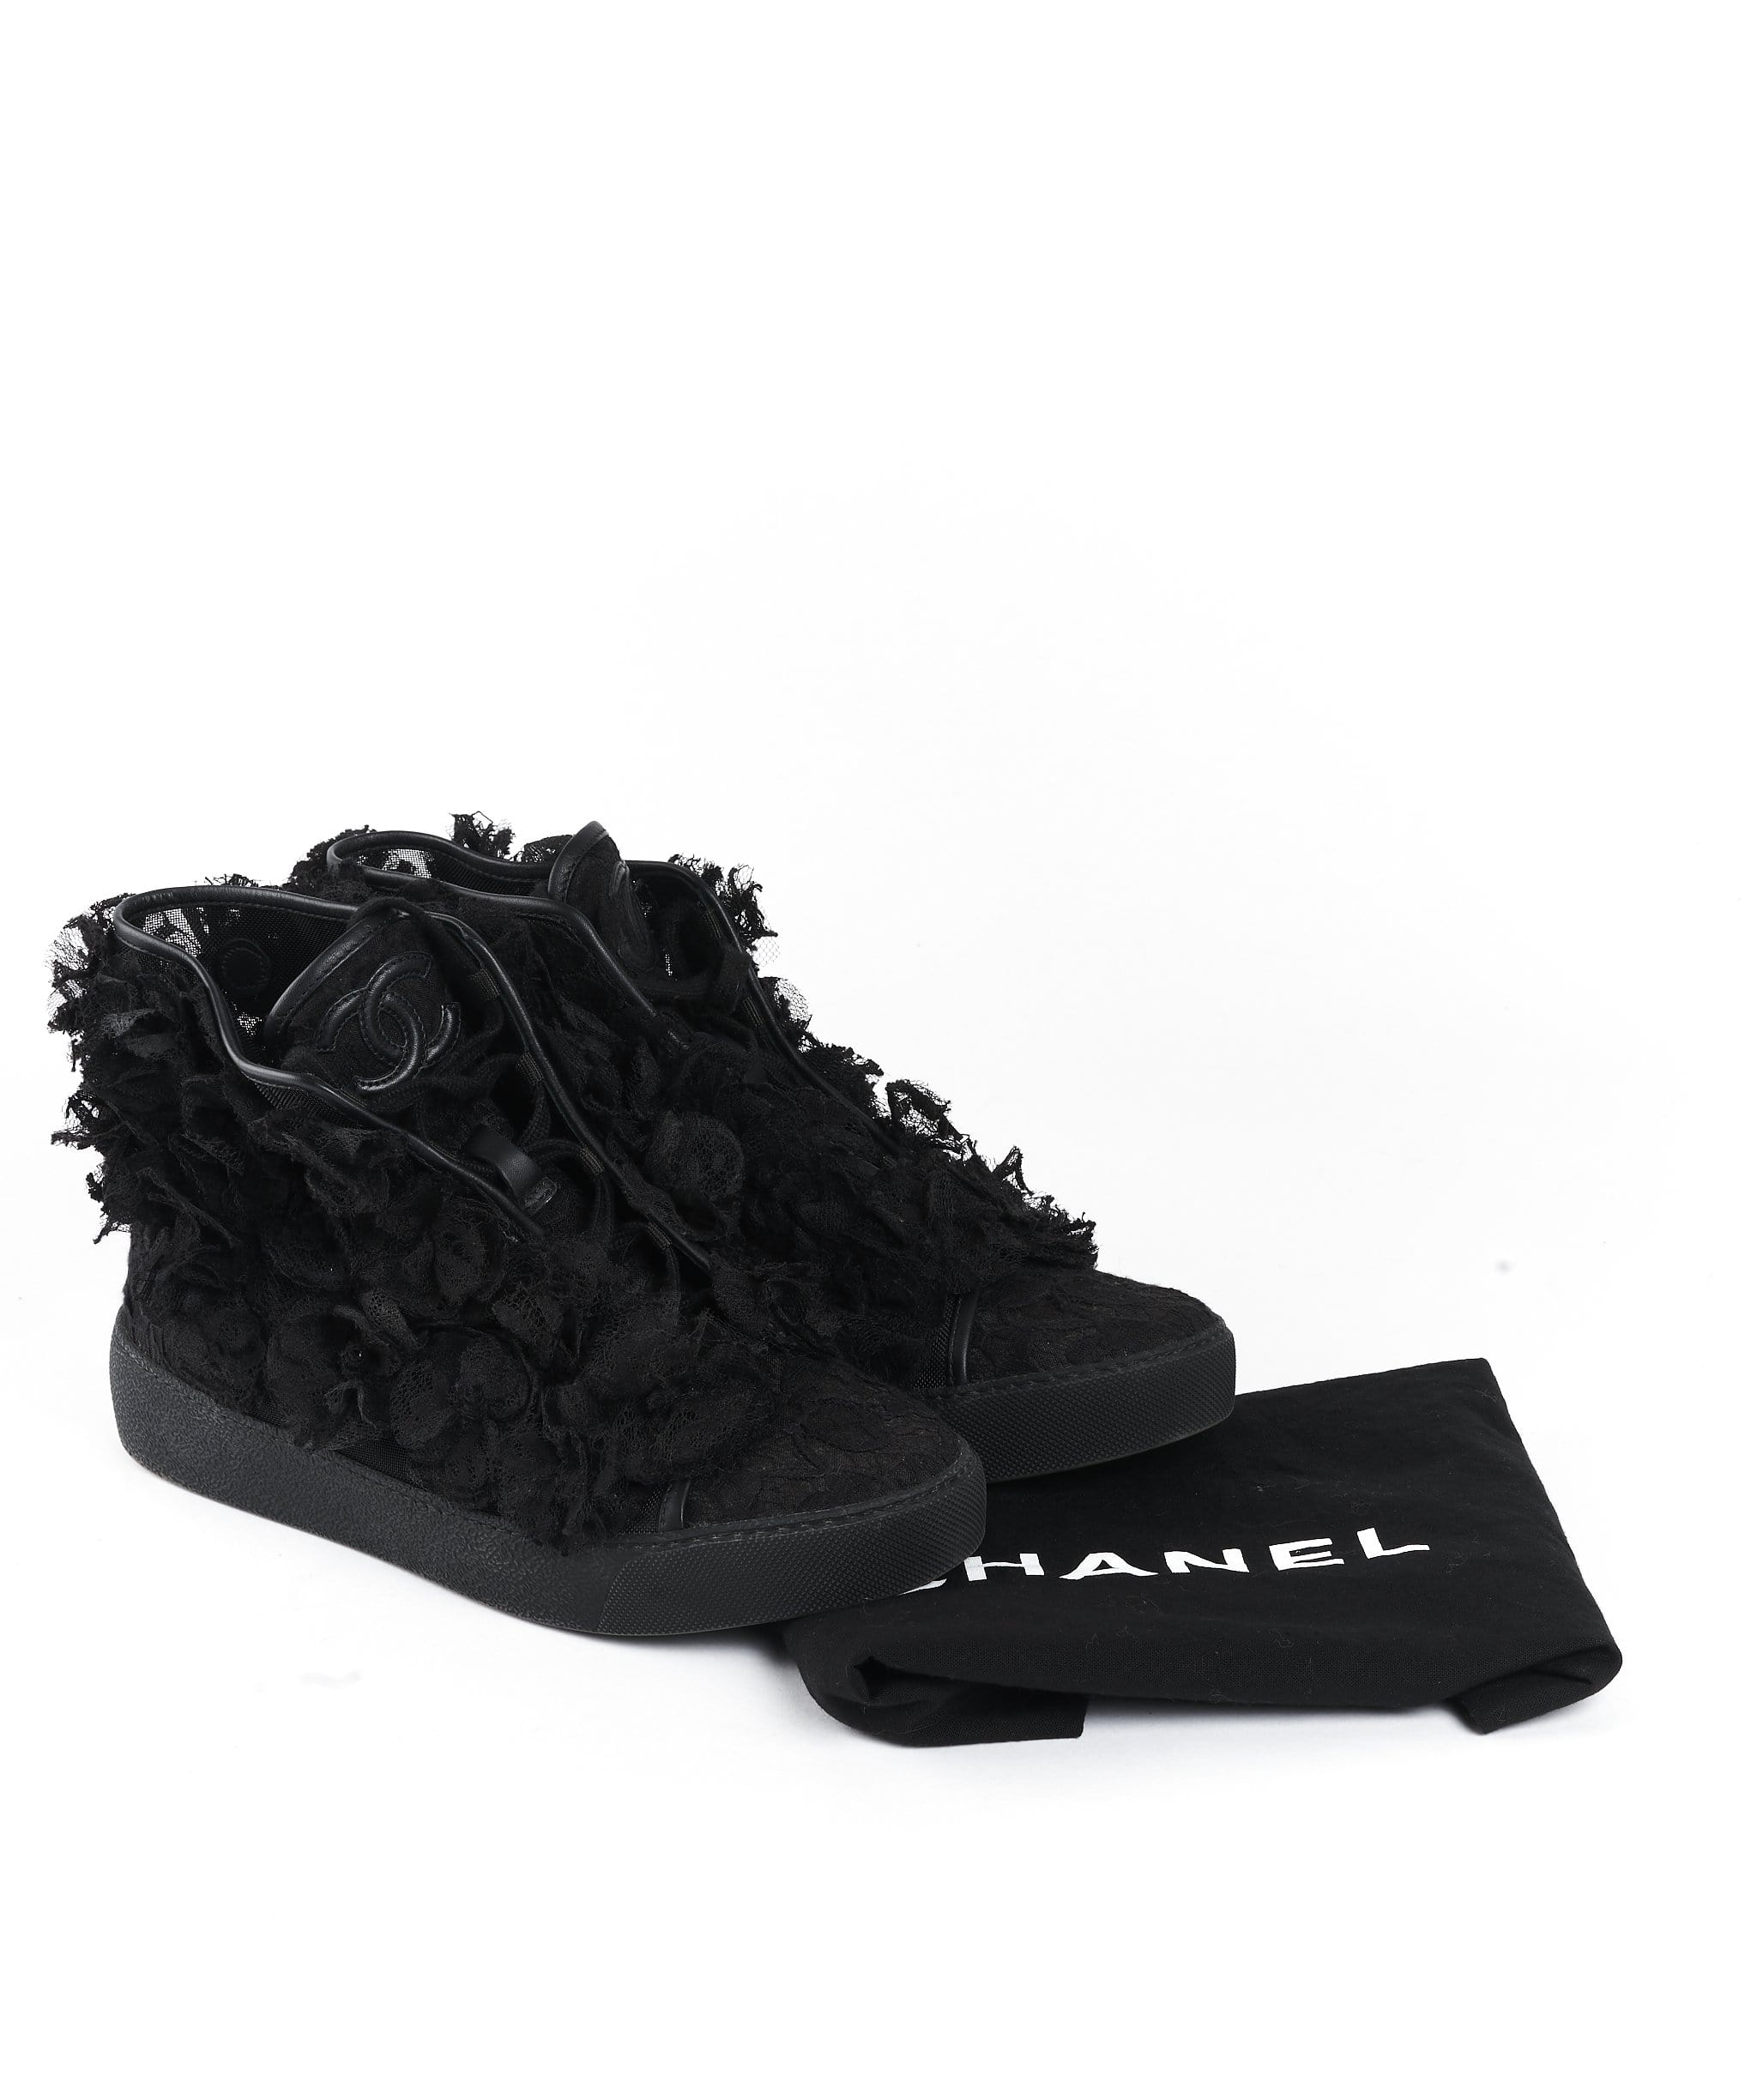 Chanel Chanel Black Runway High Top Sneakers Floral Applique Size 39